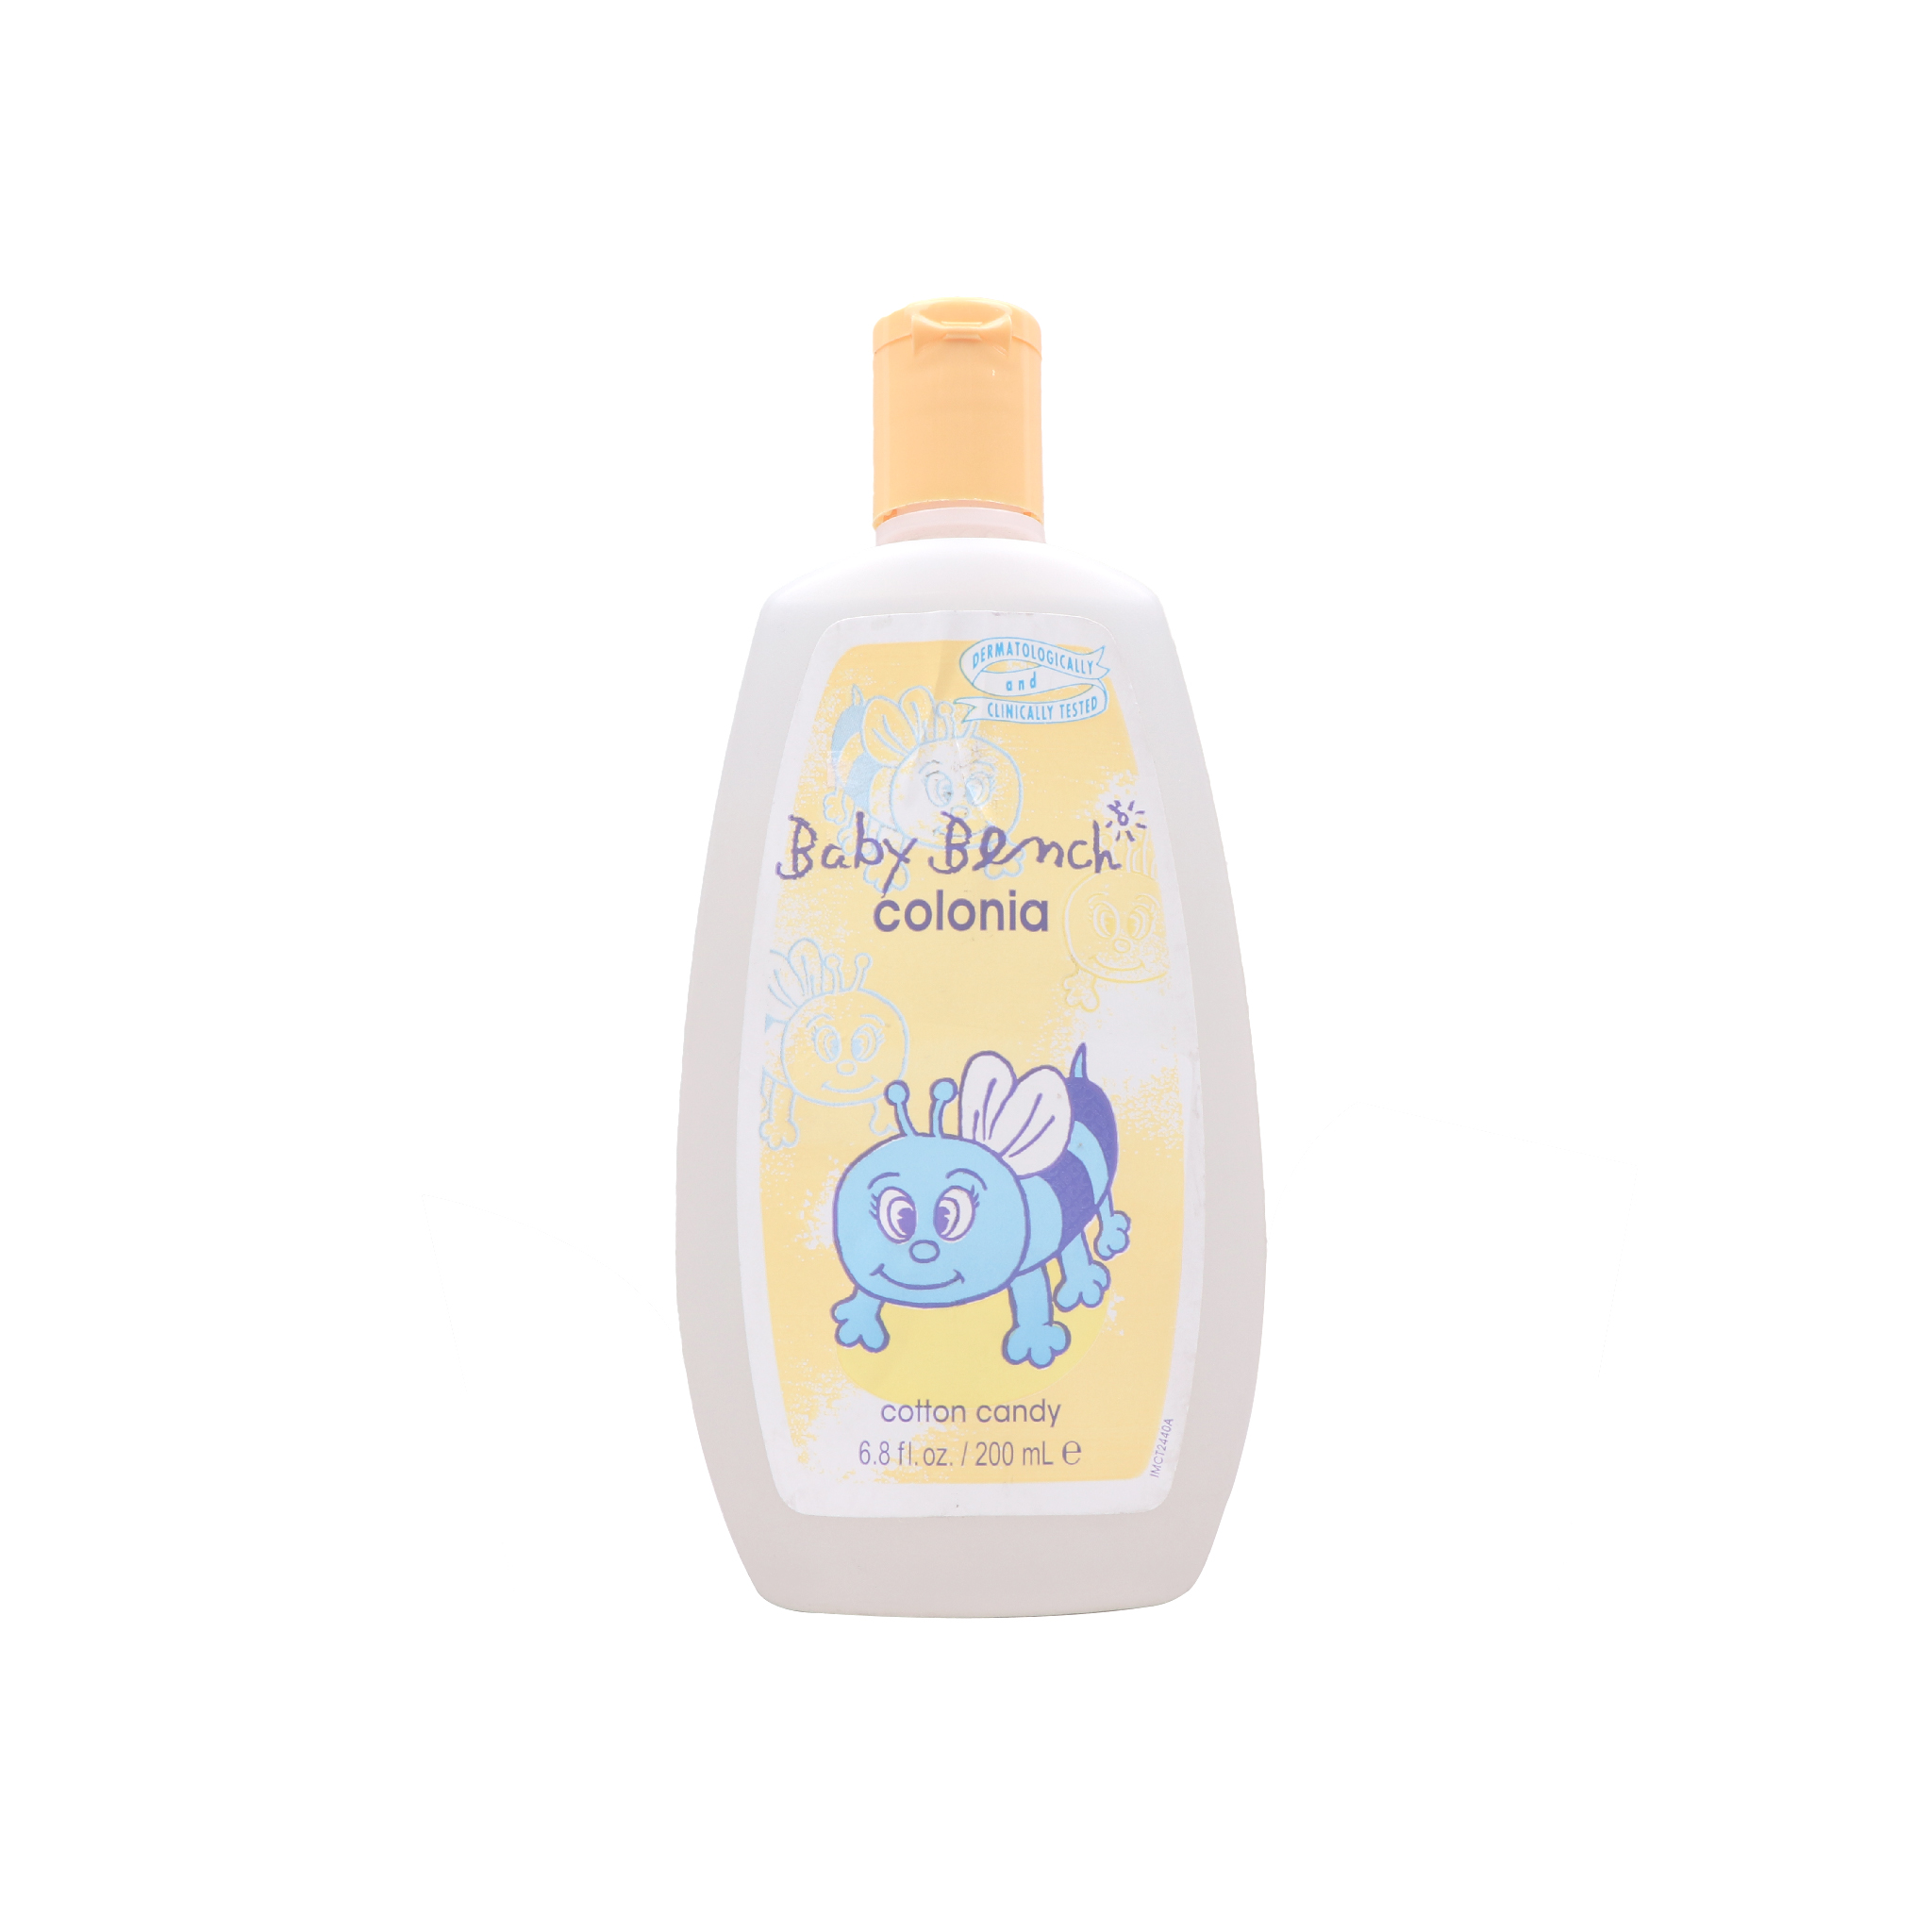 Baby Bench Colonia Cotton Candy 200ml - 1Sell